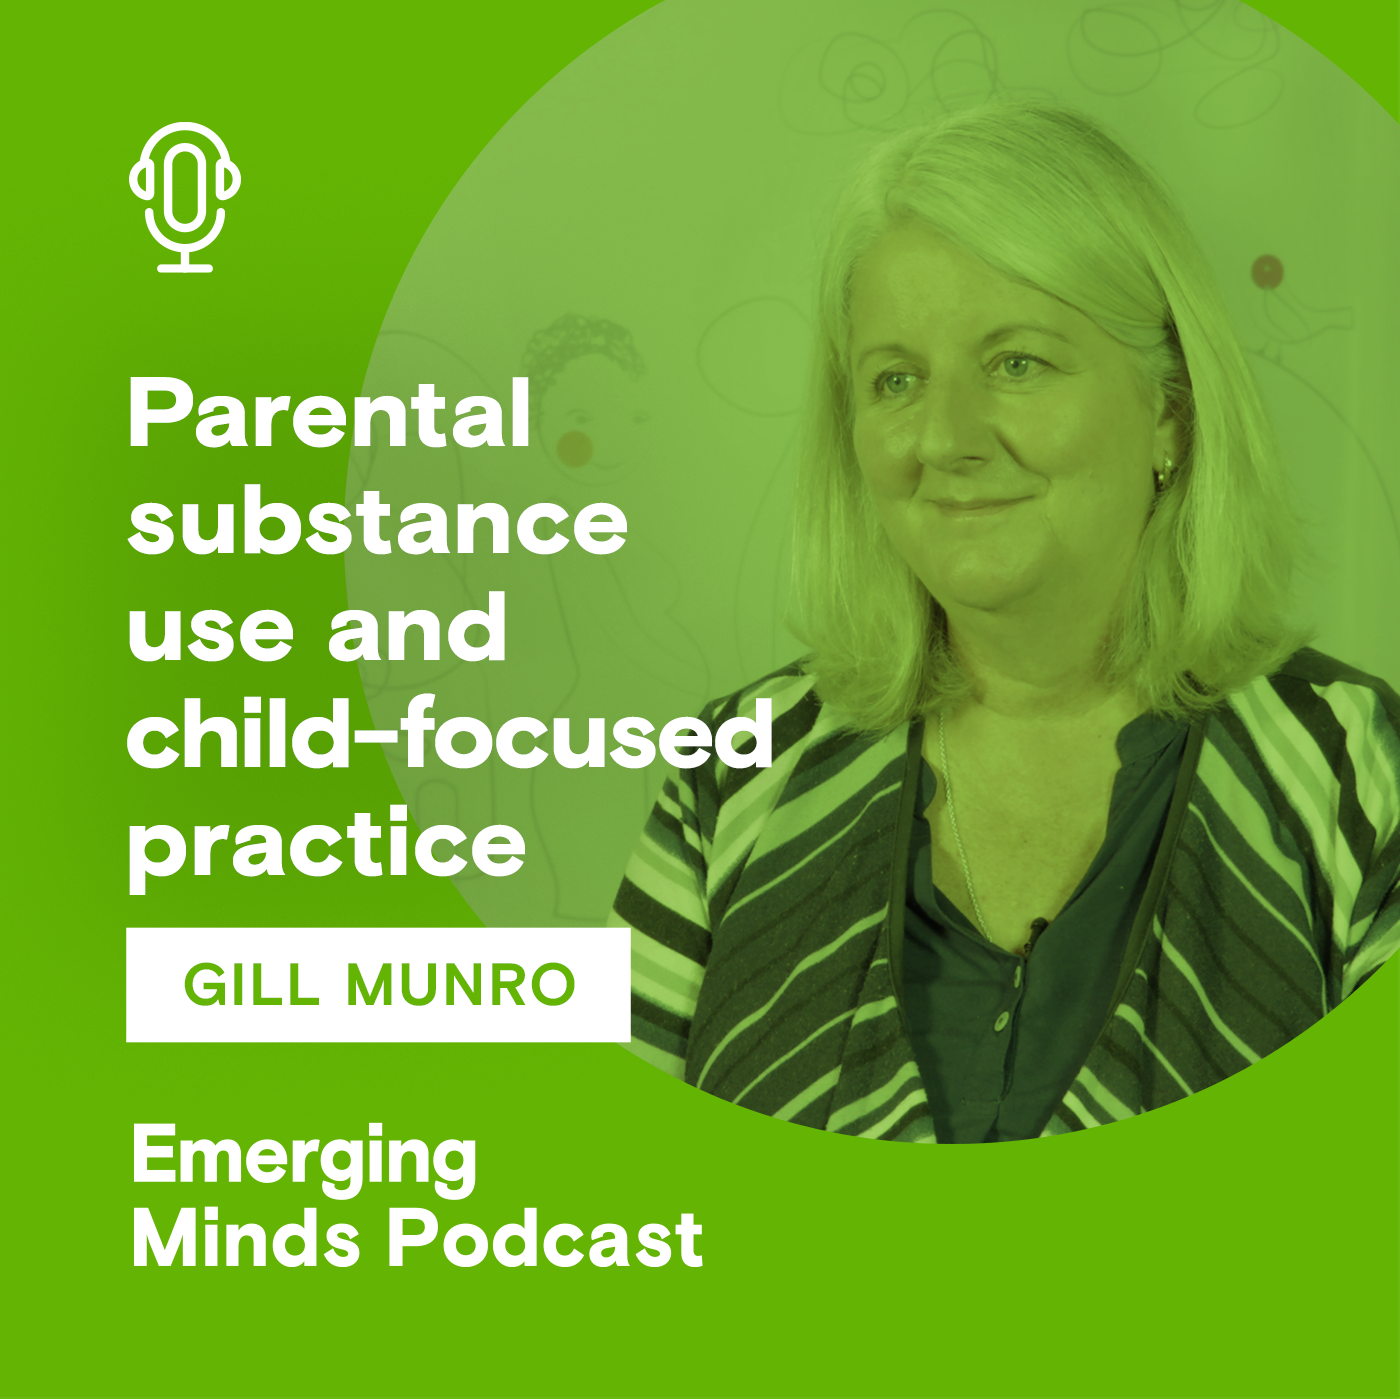 Parental substance use and child-focused practice